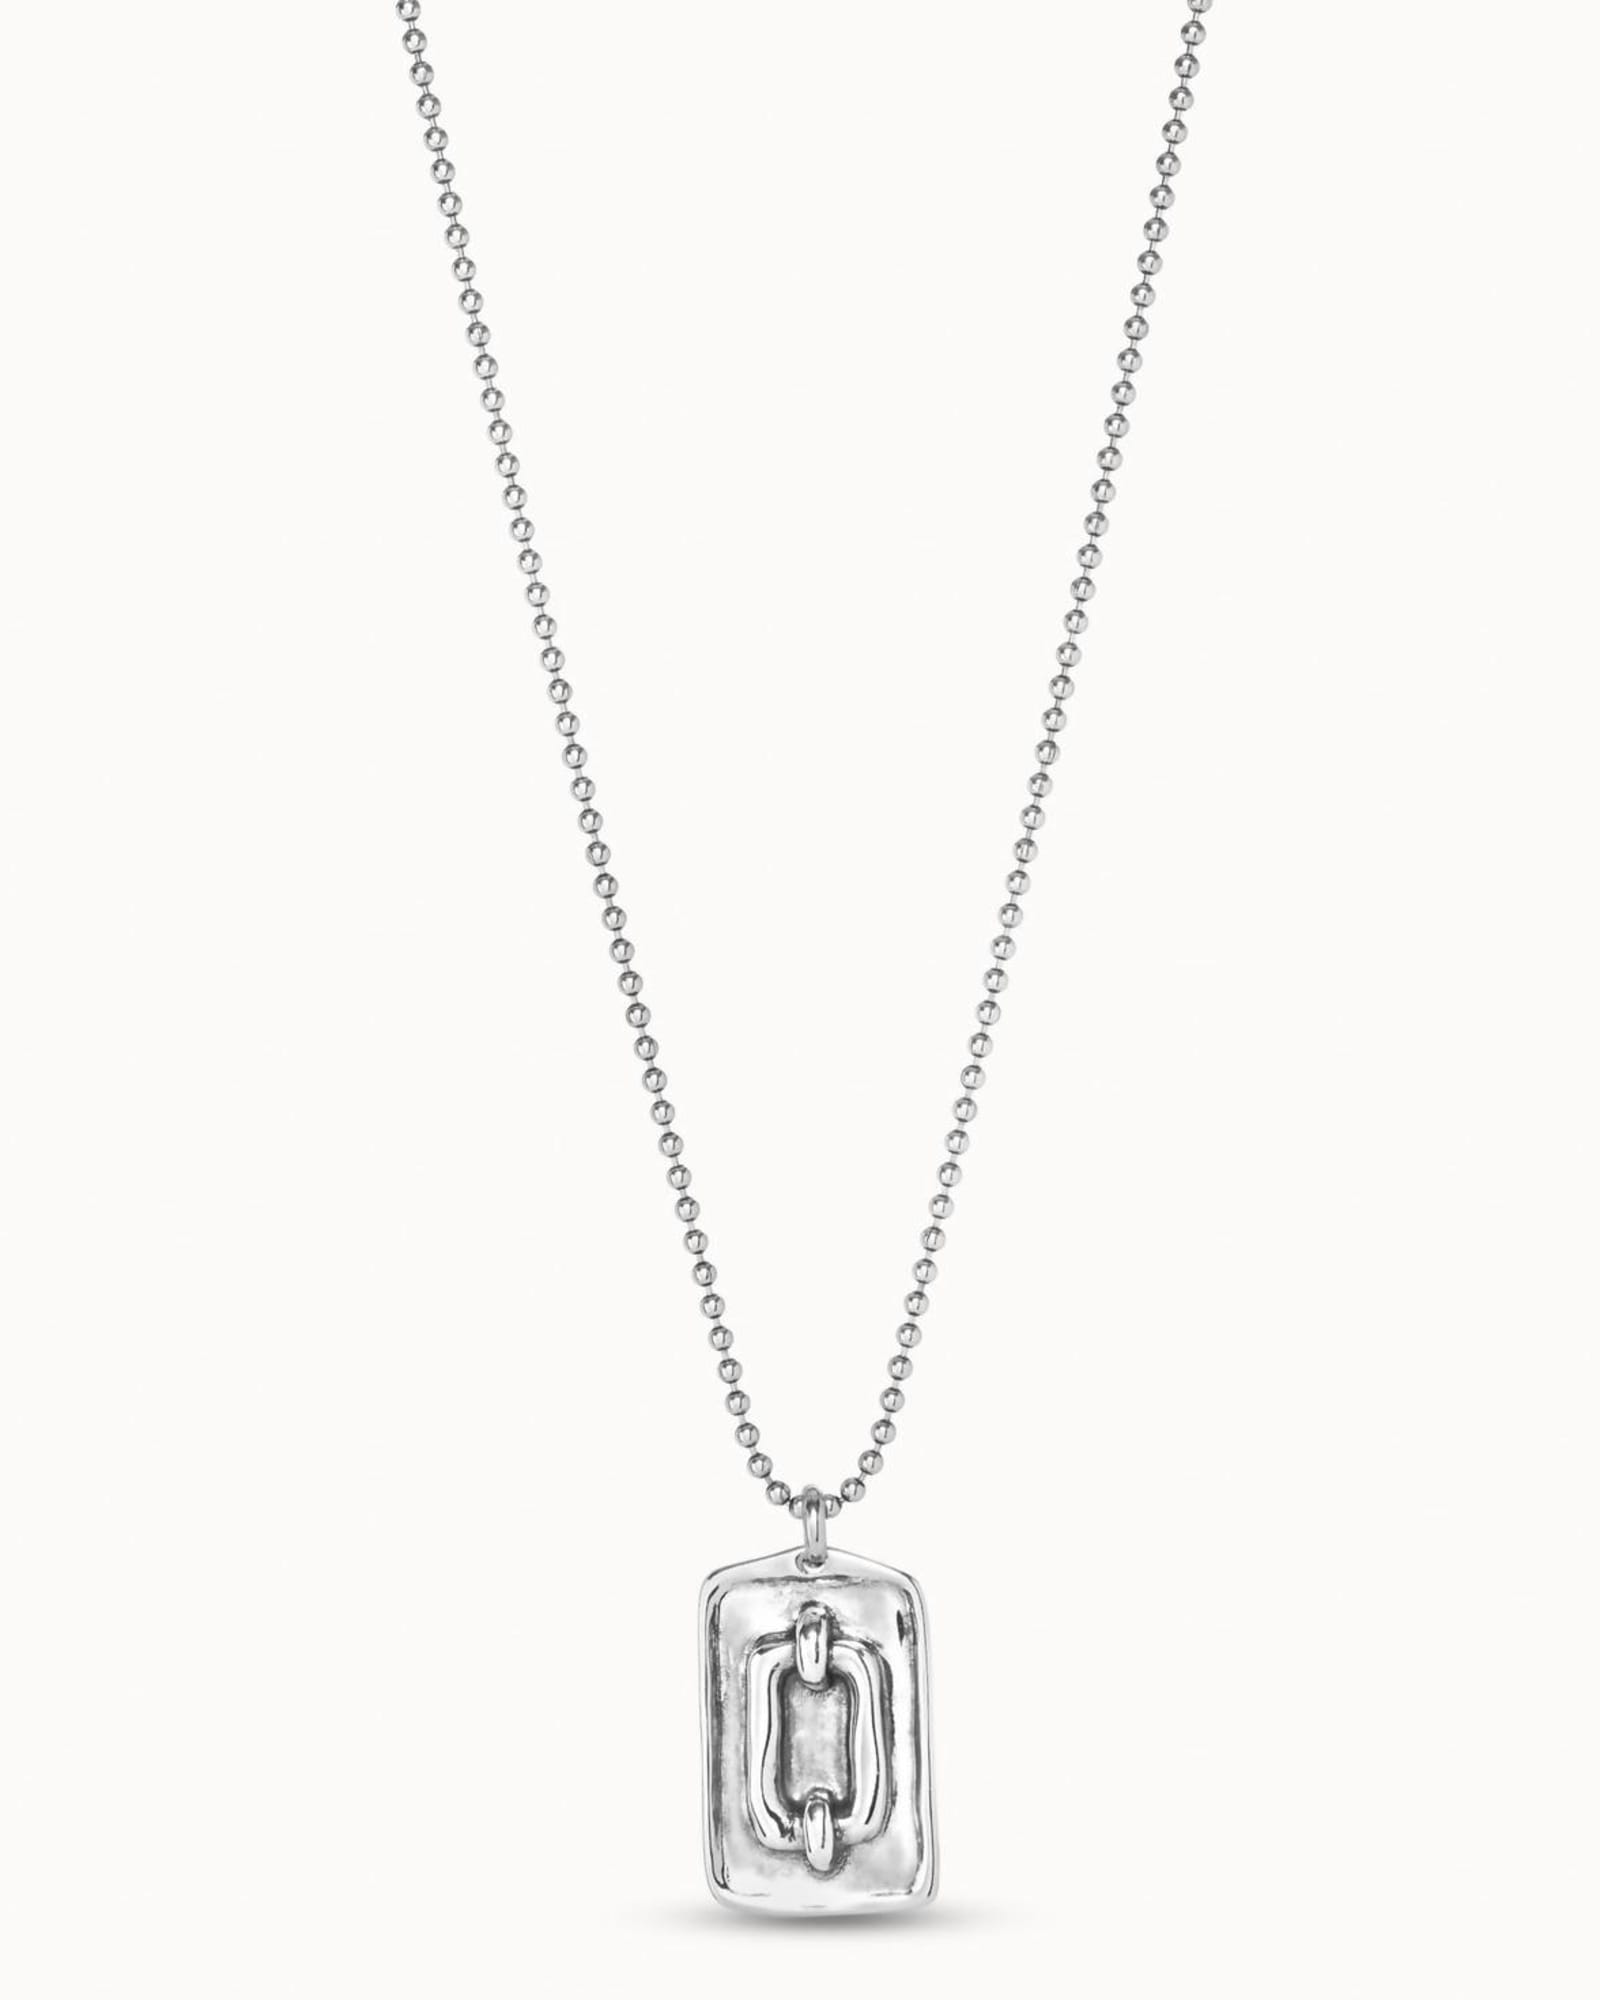 Soldier Necklace in Silver | Silver